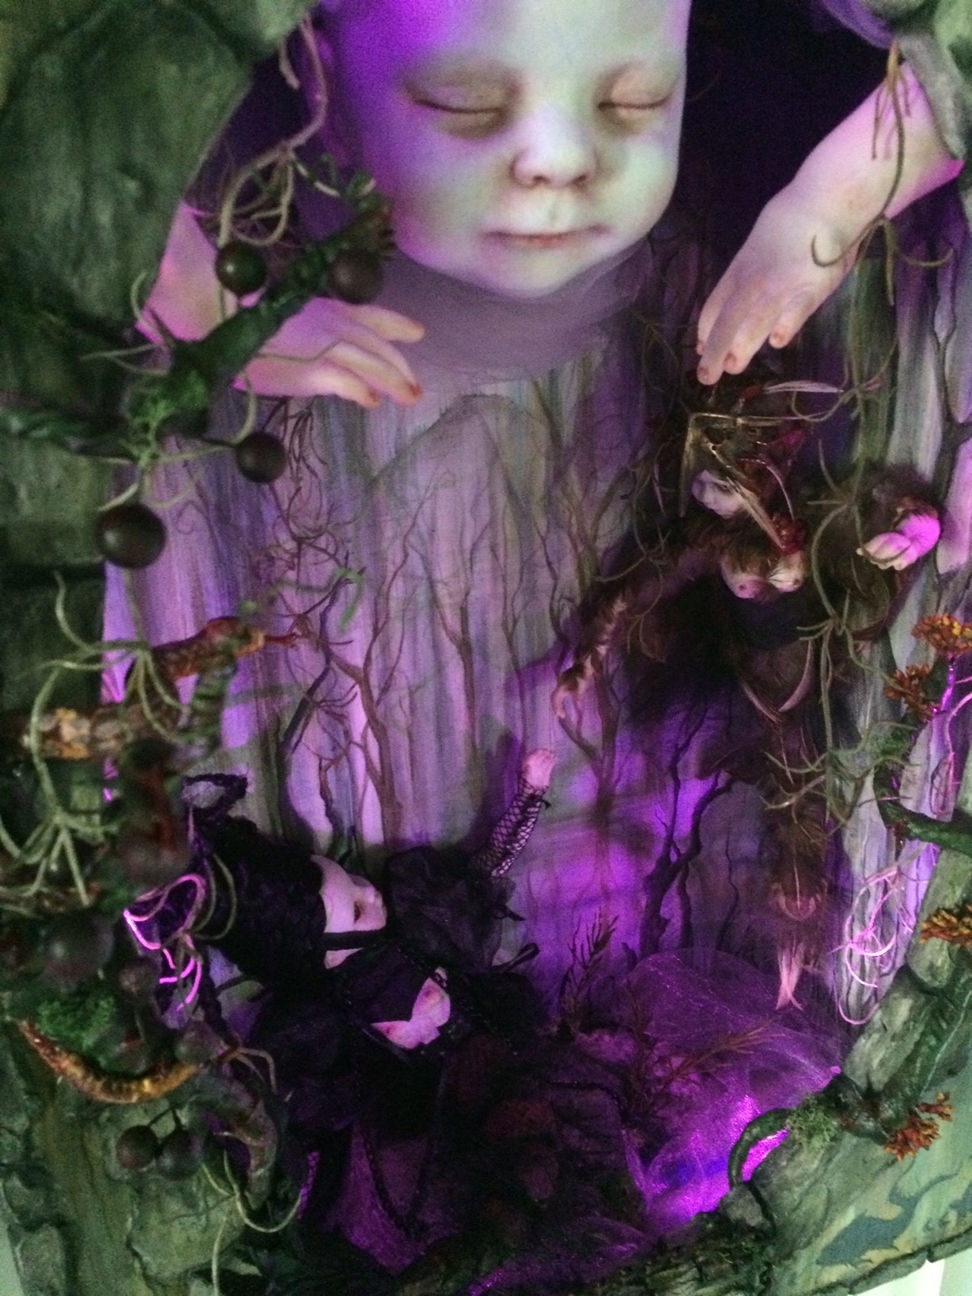 miniature shadowbox diorama lit with purple led light with two tiny gothic dolls reaching for each other in a forest setting with a bigger doll above them